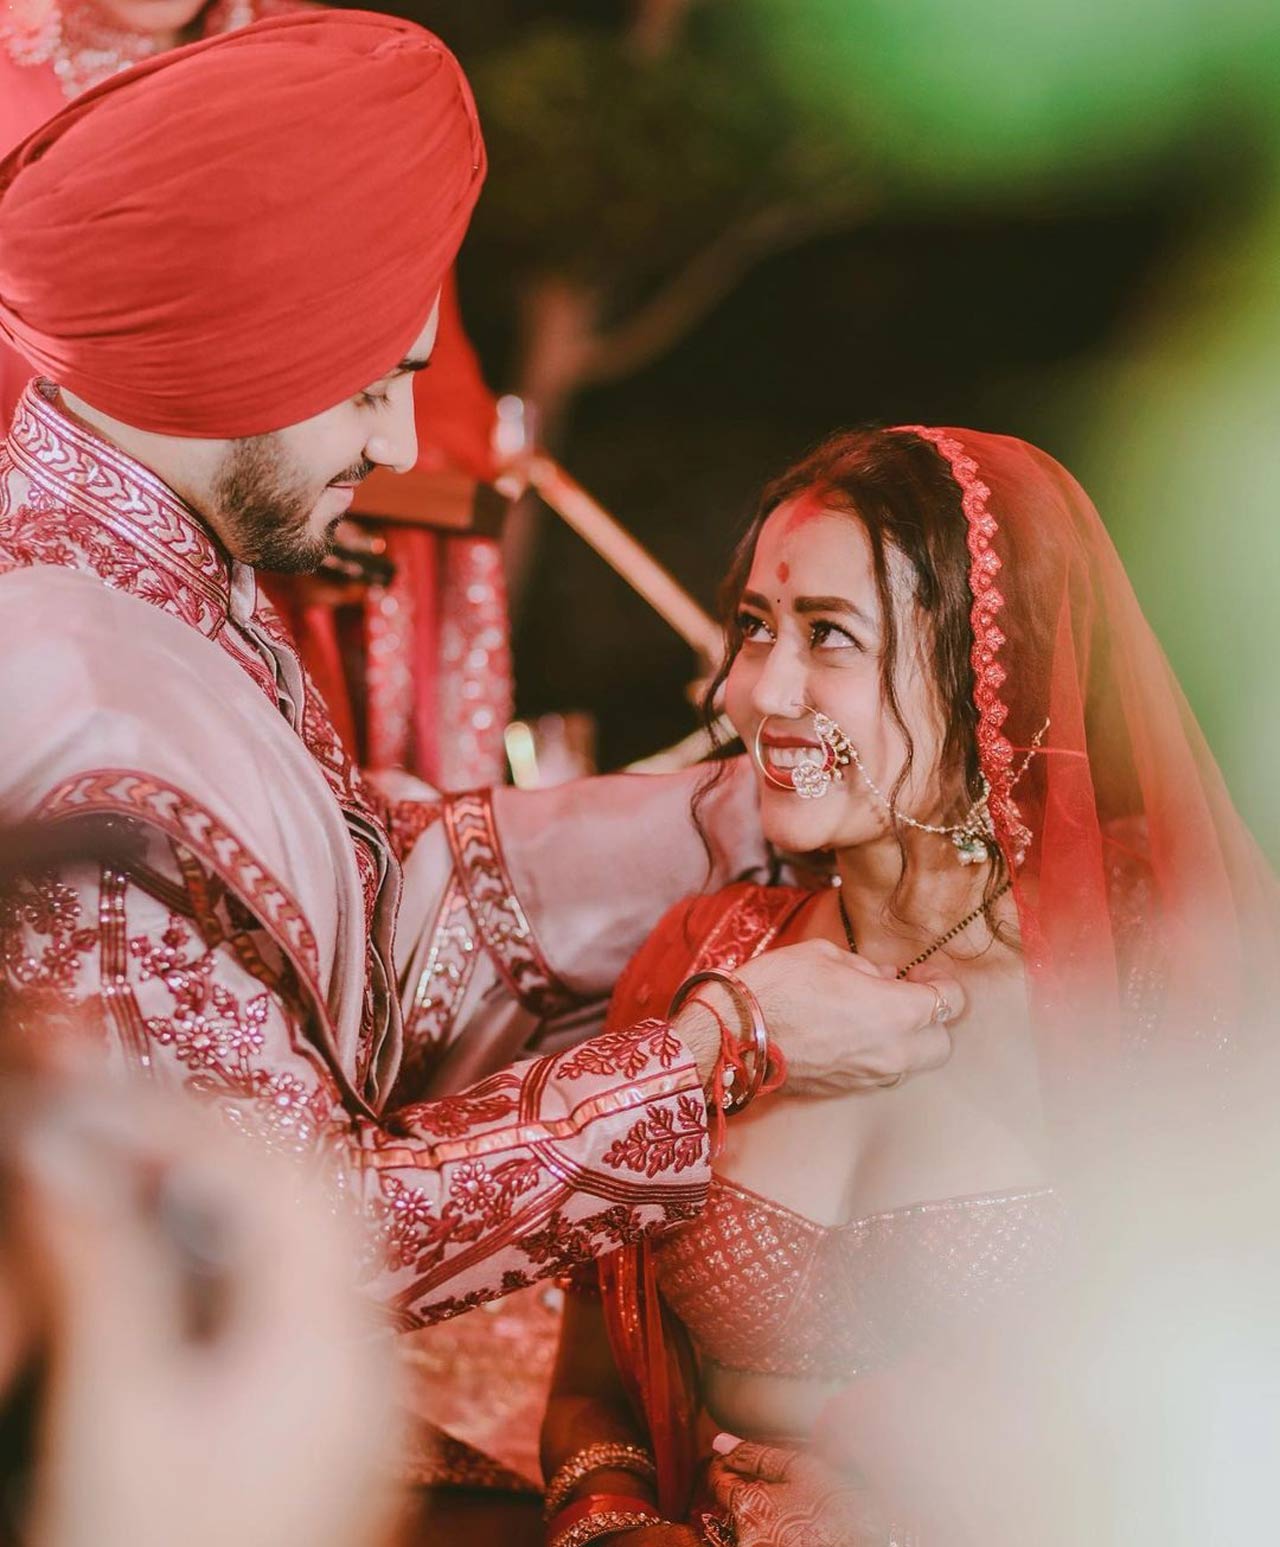 Neha Kakkar, Rohanpreet Singh tied the knot in October 2020, and not being able to contain her excitement, wrote- 